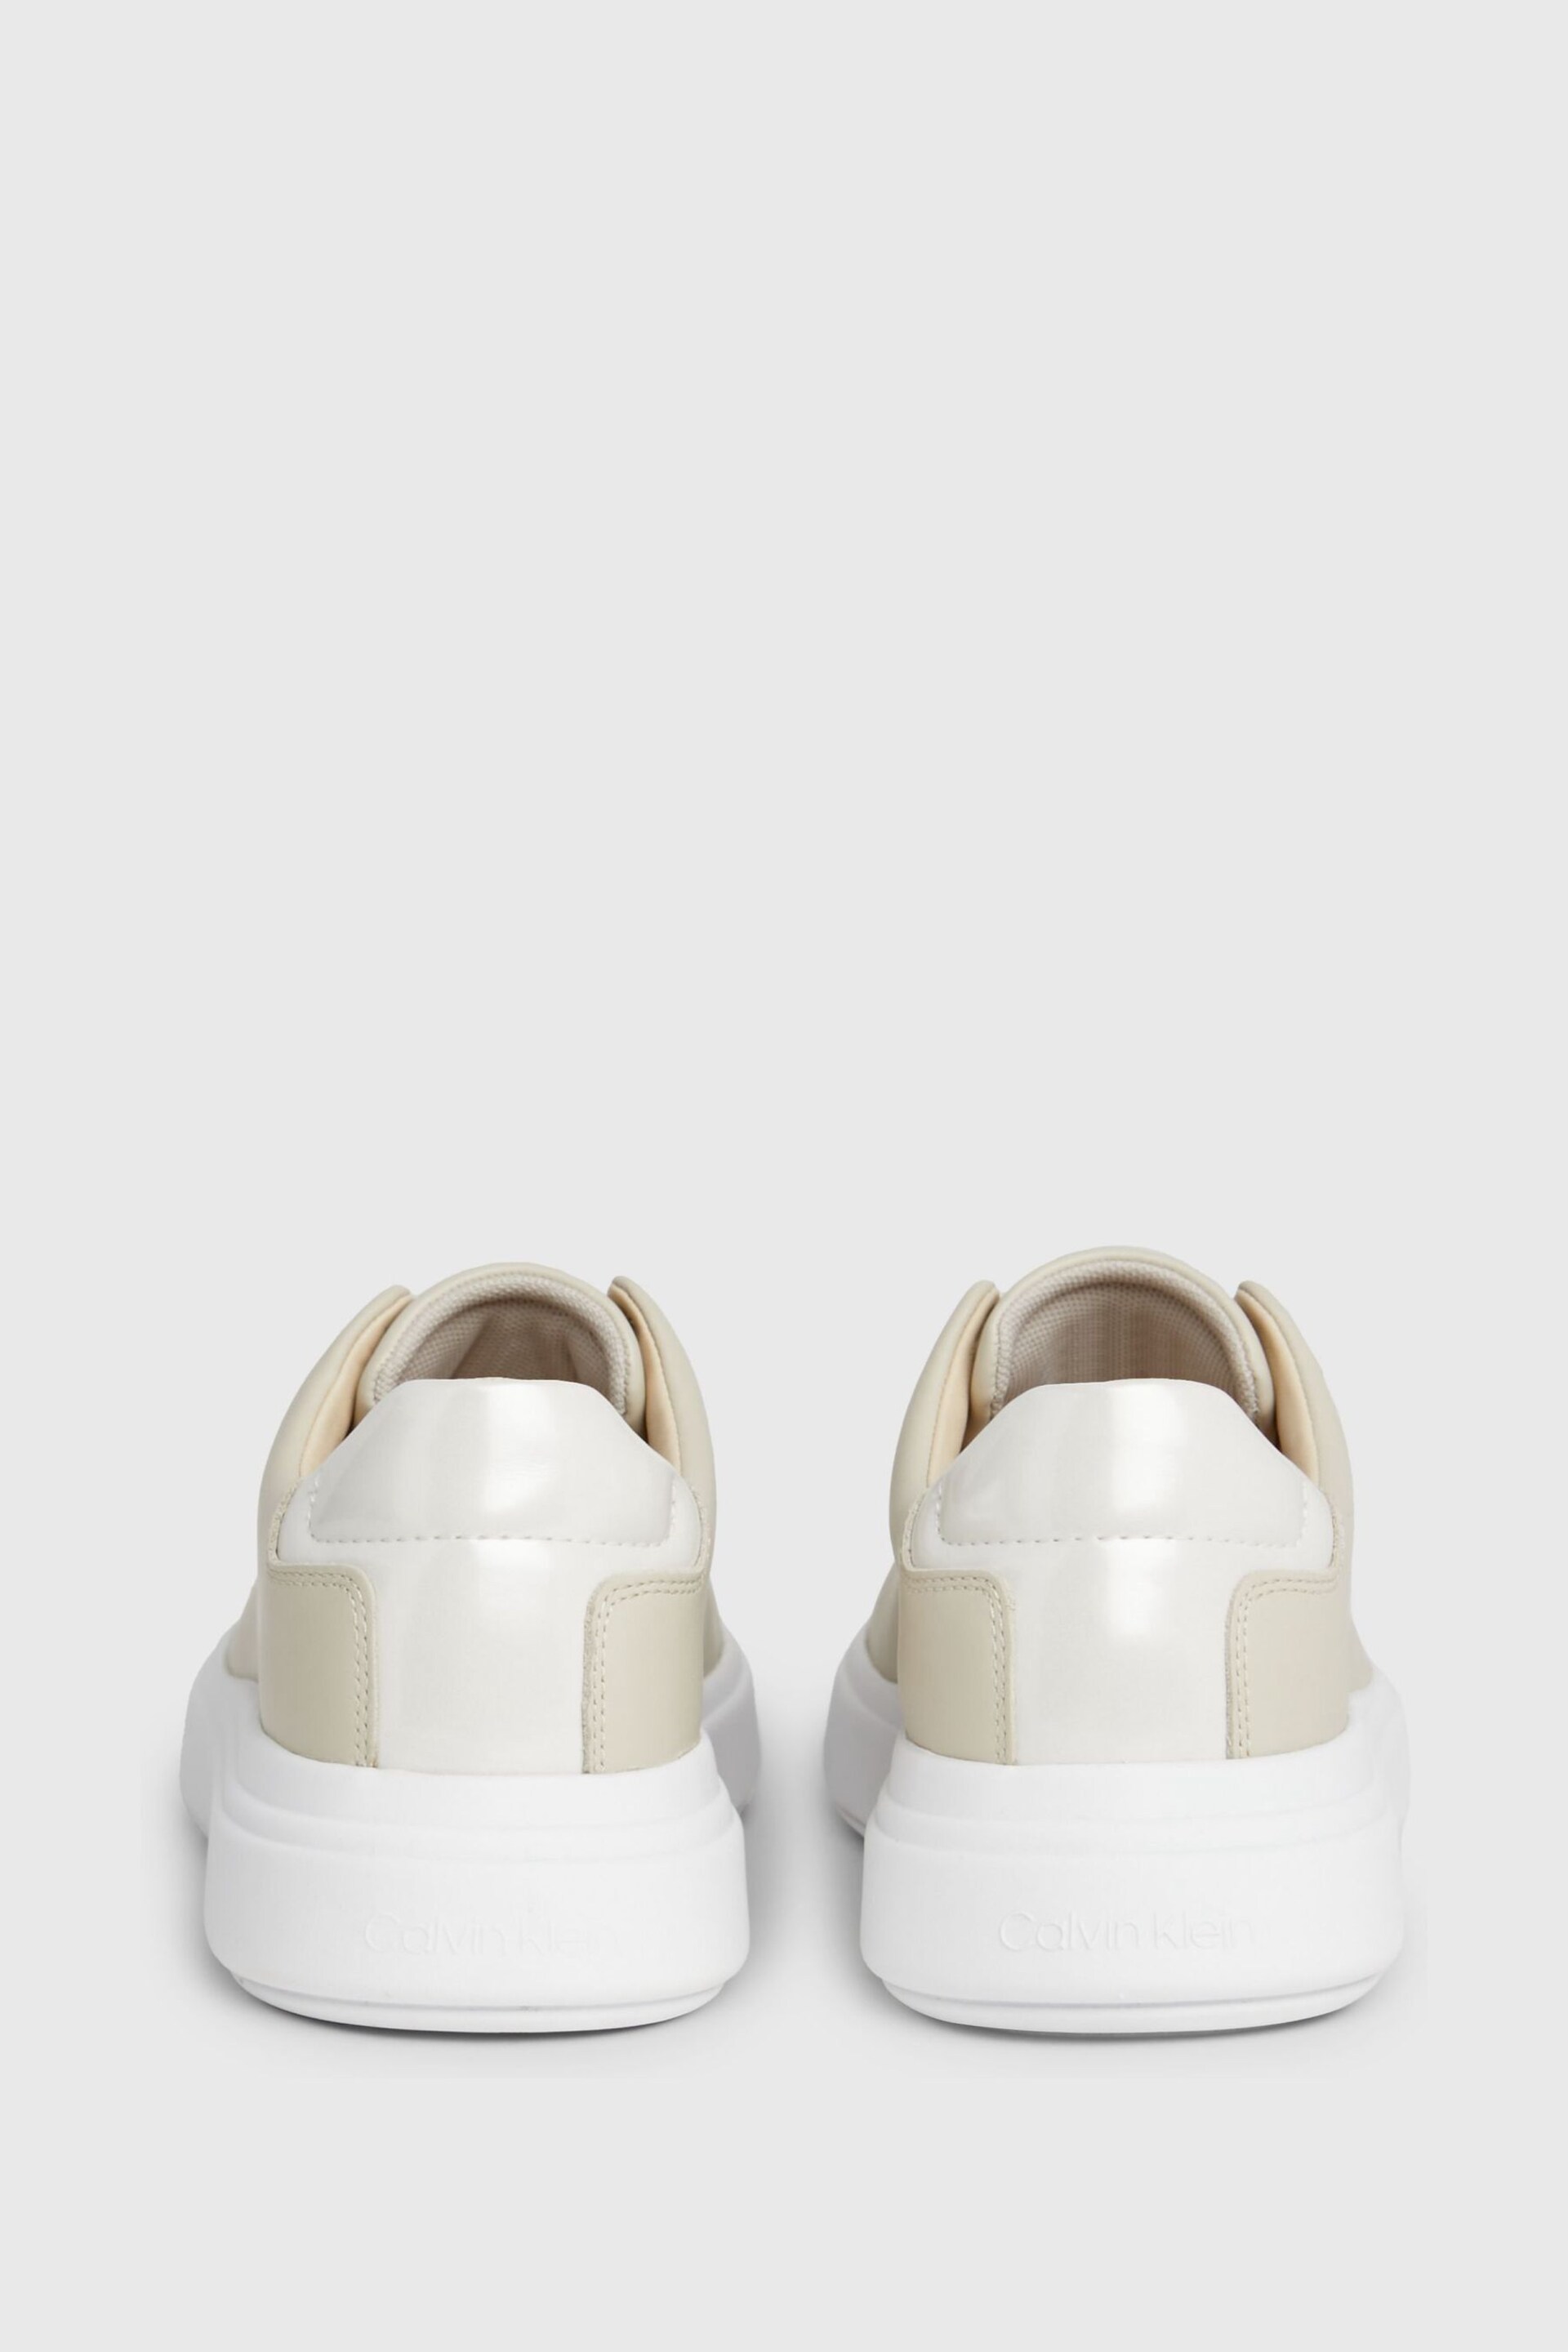 Calvin Klein White Cupsole Lace-Up Leather Sneakers - Image 7 of 7